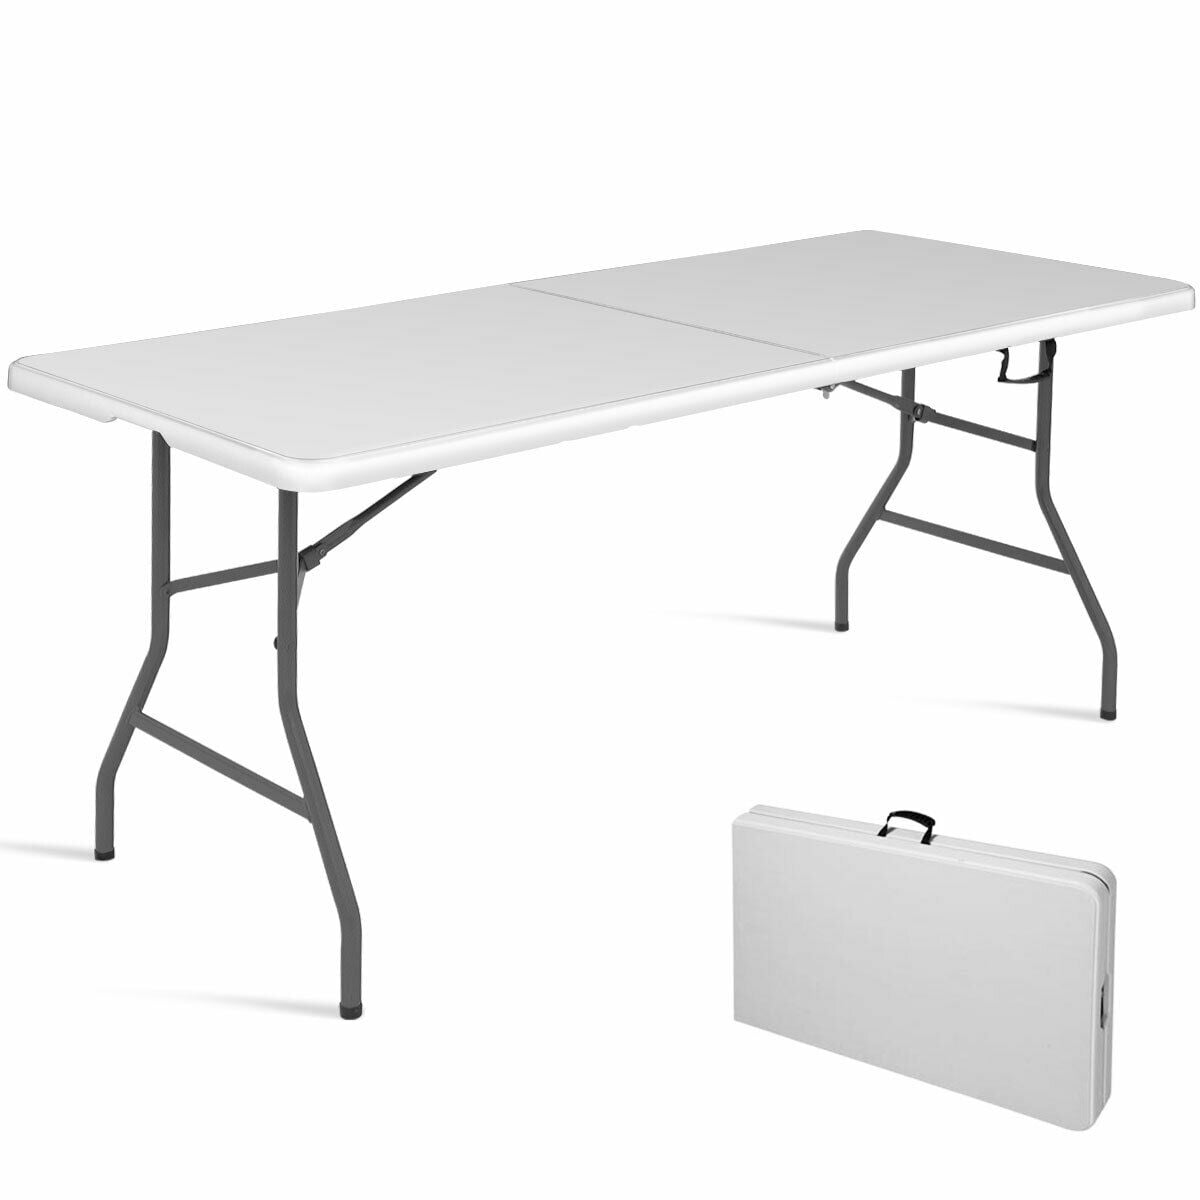 6' White Plastic Folding Training Table Picnic Party Camp Dining 220lbs Capacity 